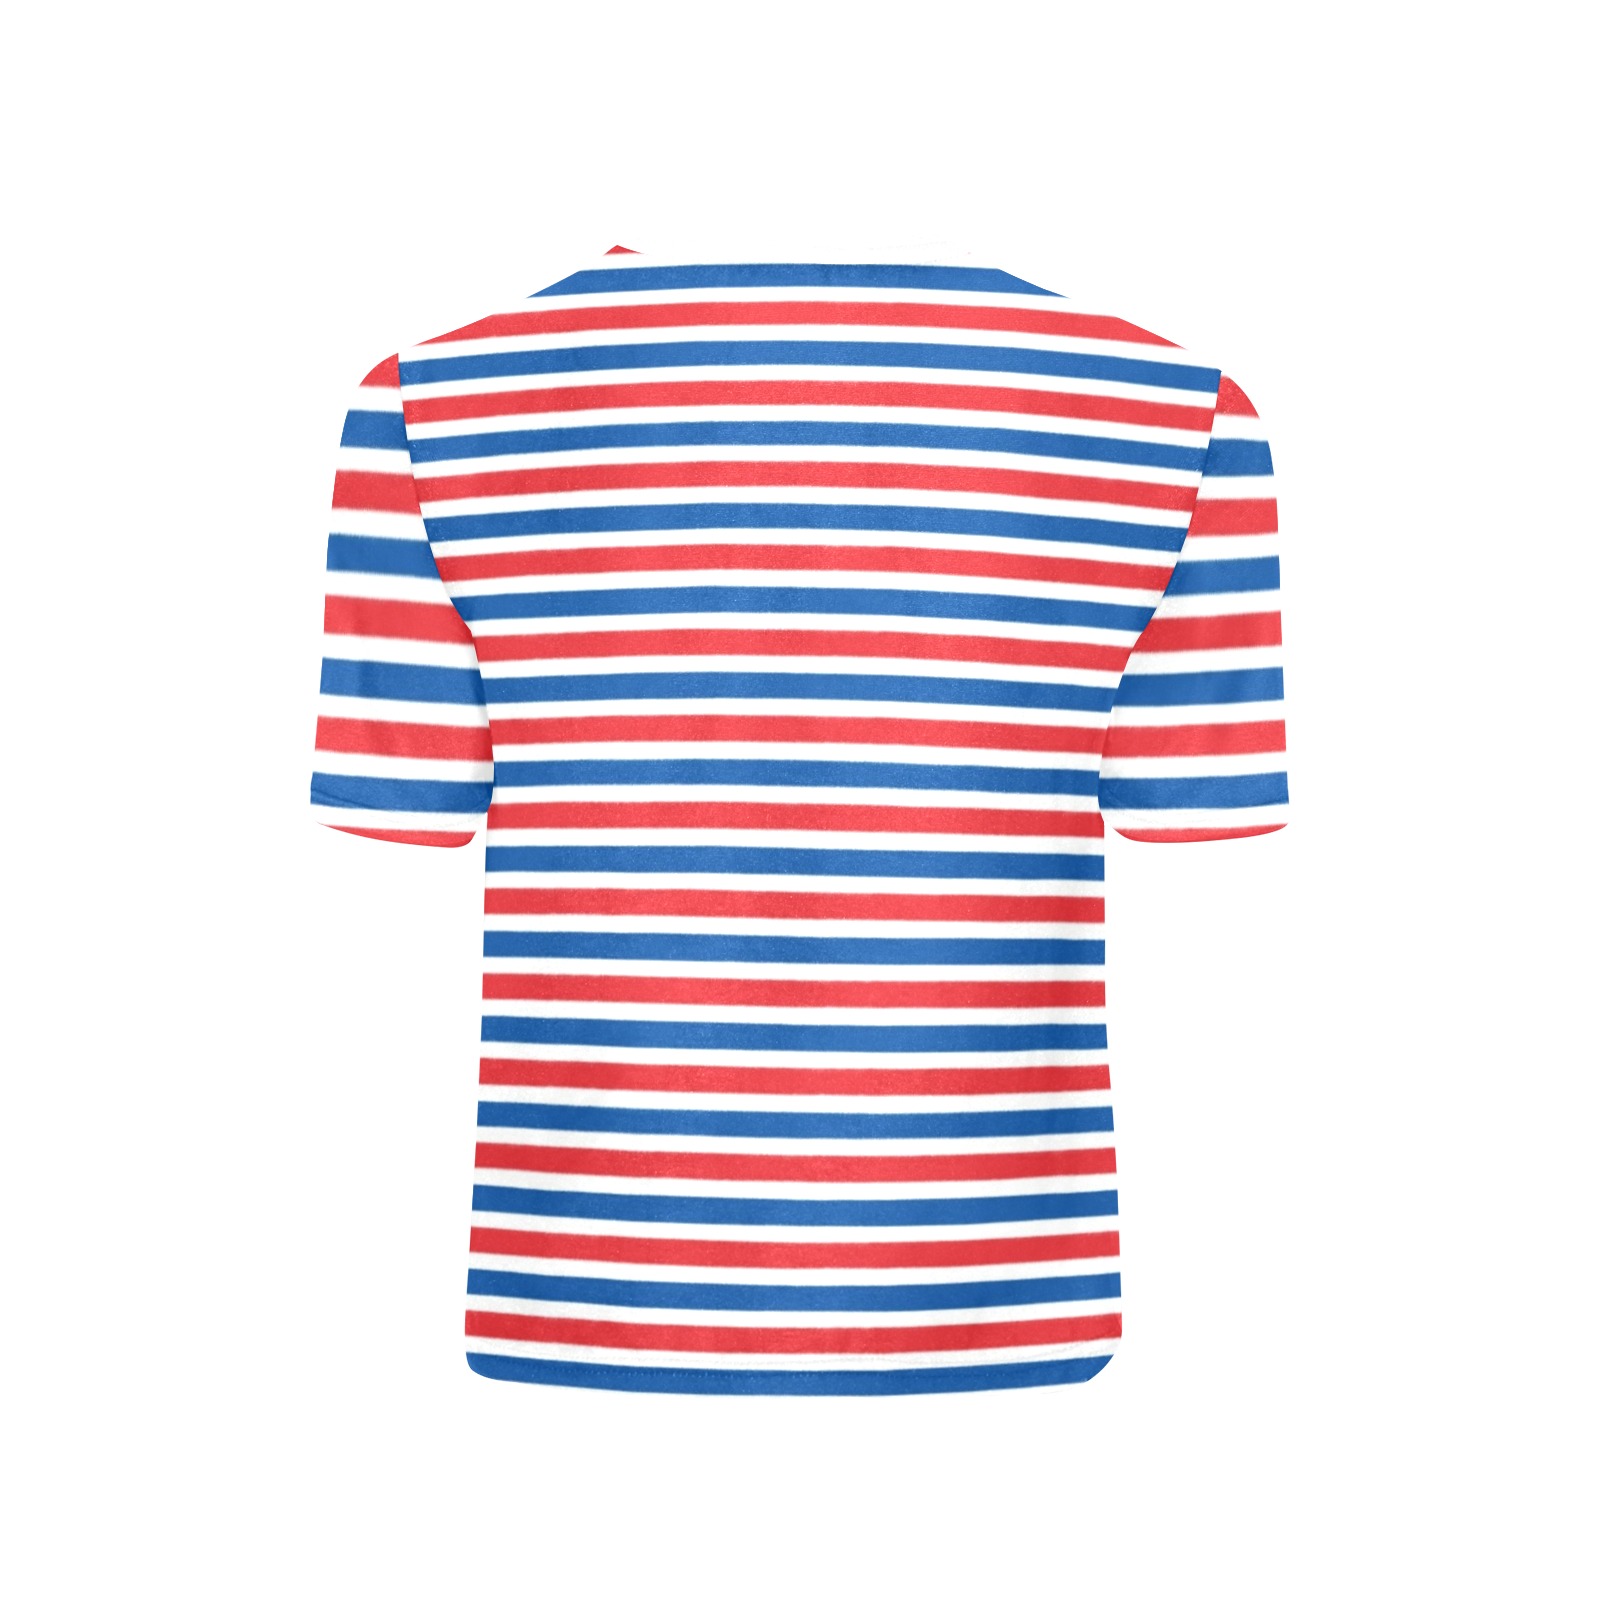 Basic Red, White and Blue Striped Tee Little Girls' All Over Print Crew Neck T-Shirt (Model T40-2)